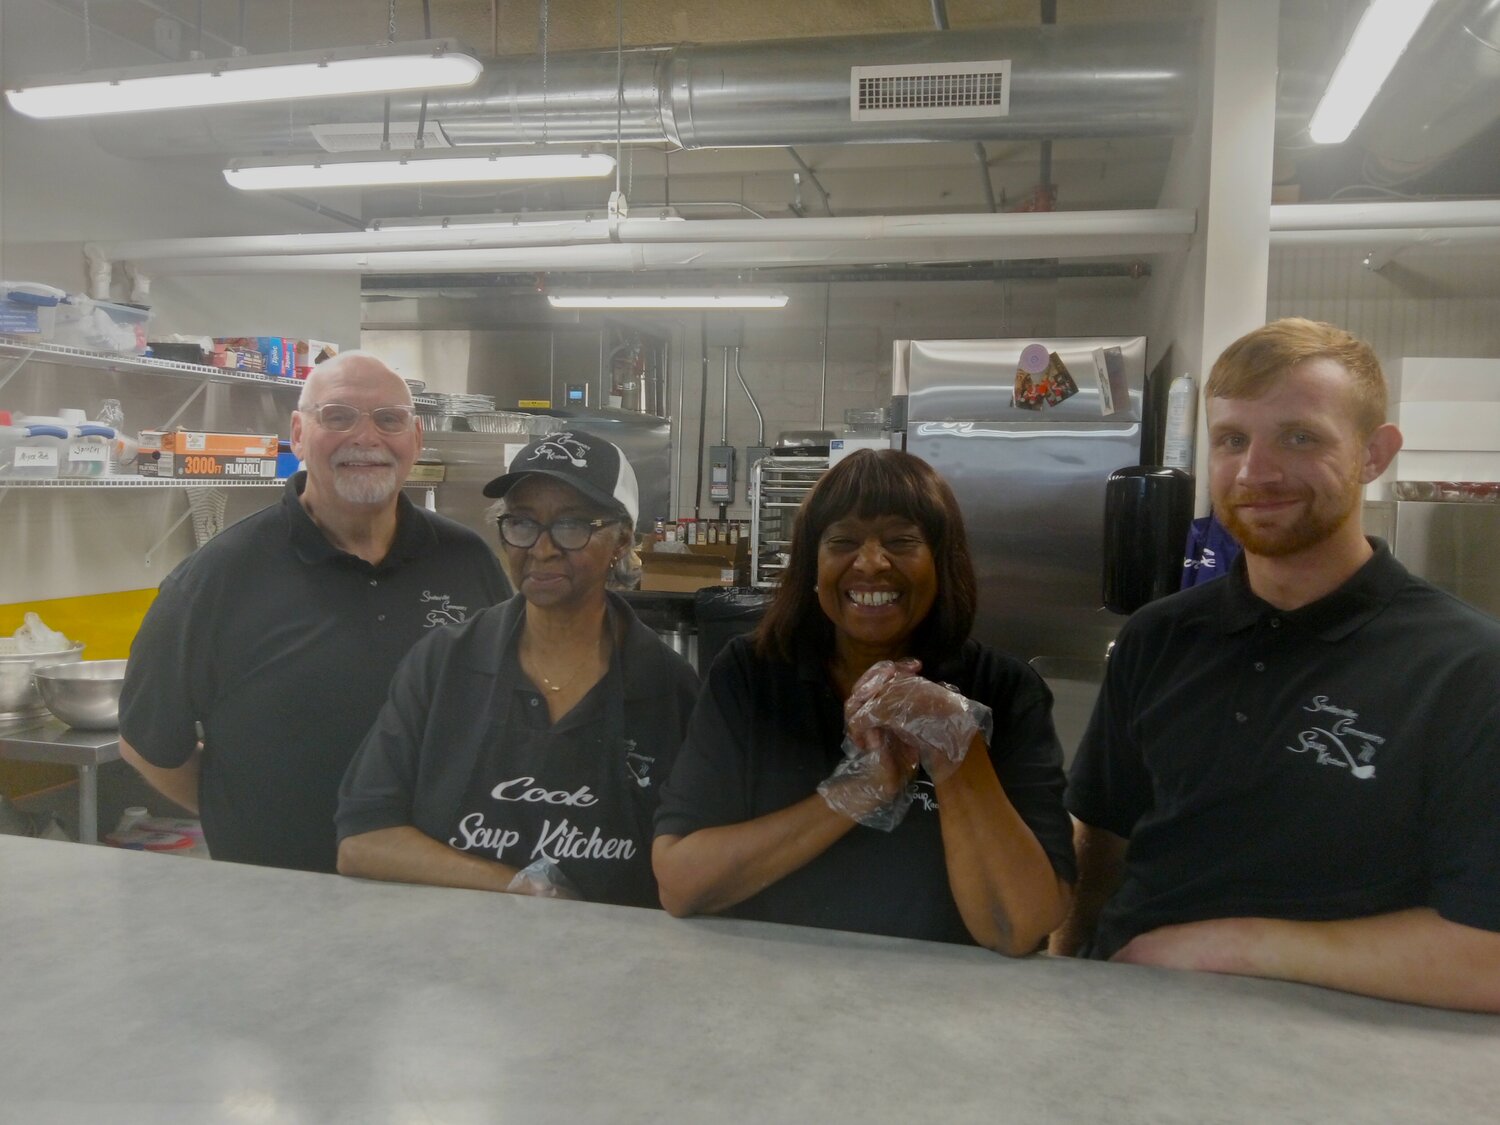 Volunteers at Shelbyville Community Soup Kitchen are getting ready for the fall fundraiser on Sunday, Nov. 12, from 11 a.m. to 2 p.m. at the center dining hall. From left, Robert Martin, kitchen operations manager and volunteers, Adeline Green, Gloria Johnson and Andrew Guill. Not pictured is volunteer Gayla Sanchez. See the Nov. 1 Times-Gazette for full story.